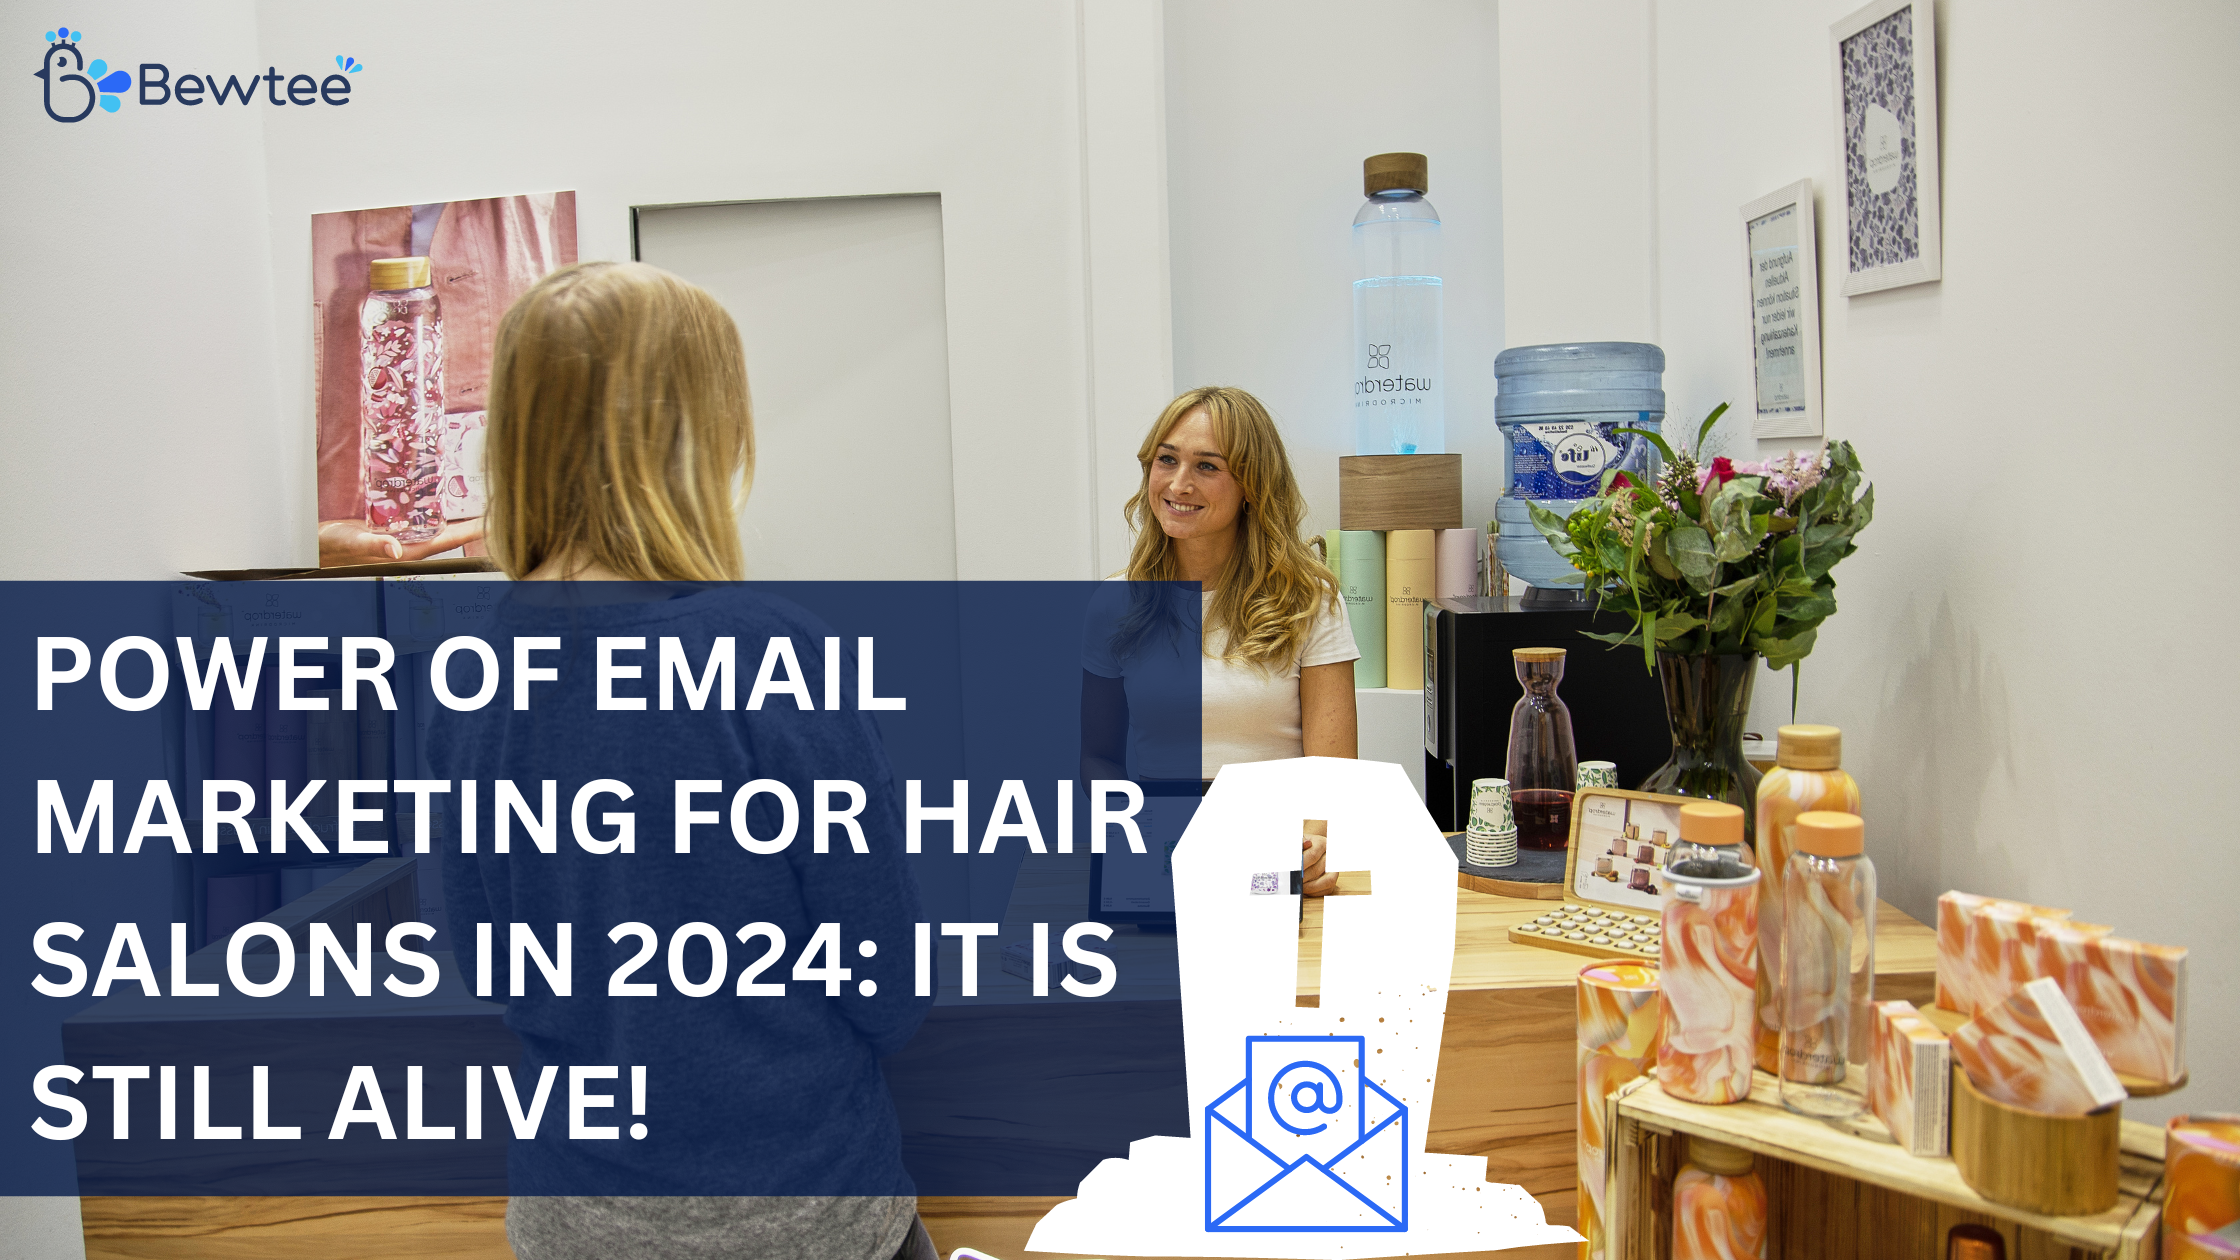 Power of Email Marketing for Hair Salons in 2024: It is still alive!